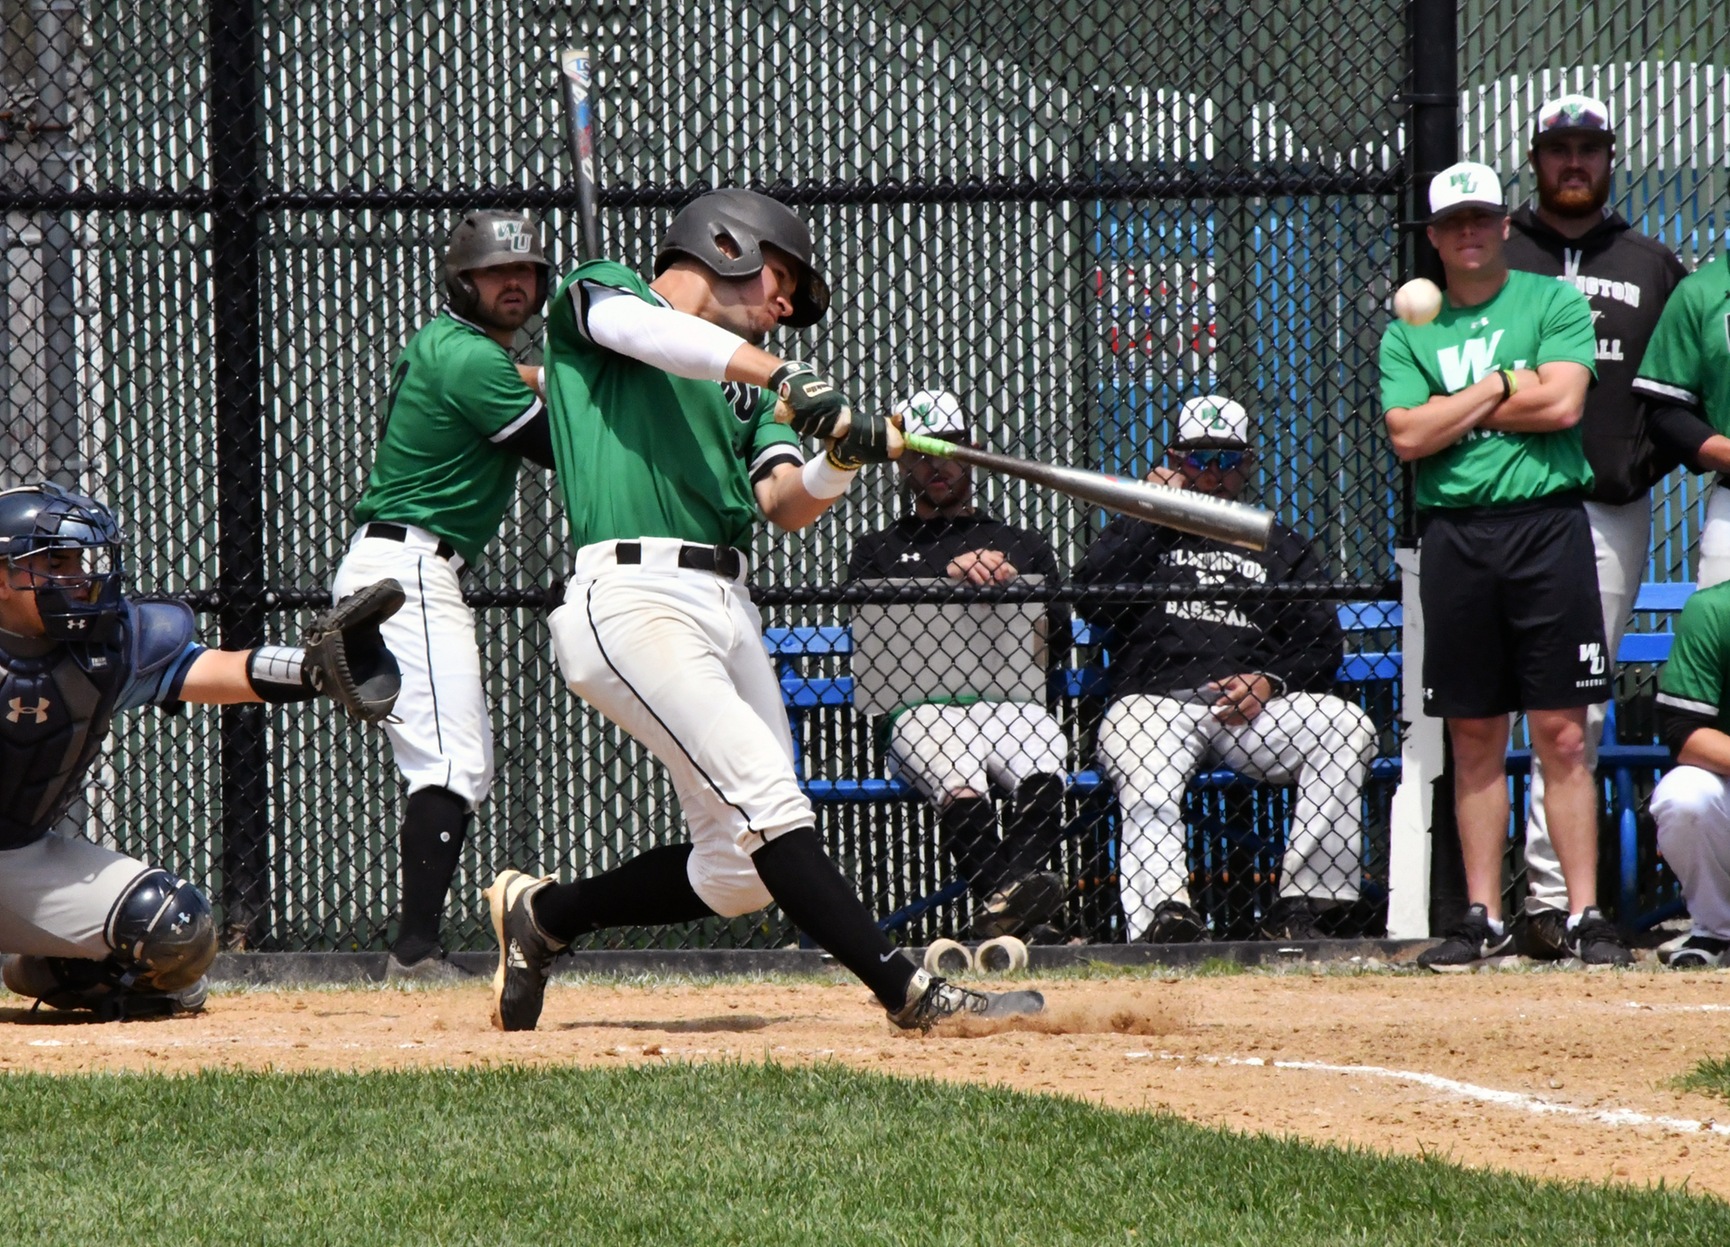 Photo of Max Carney's go-ahead RBI single that would stick as the game-winning score, 2-1, against Jefferson in the CACC Tournament. Photo by Ellen O'Brien, CACC.